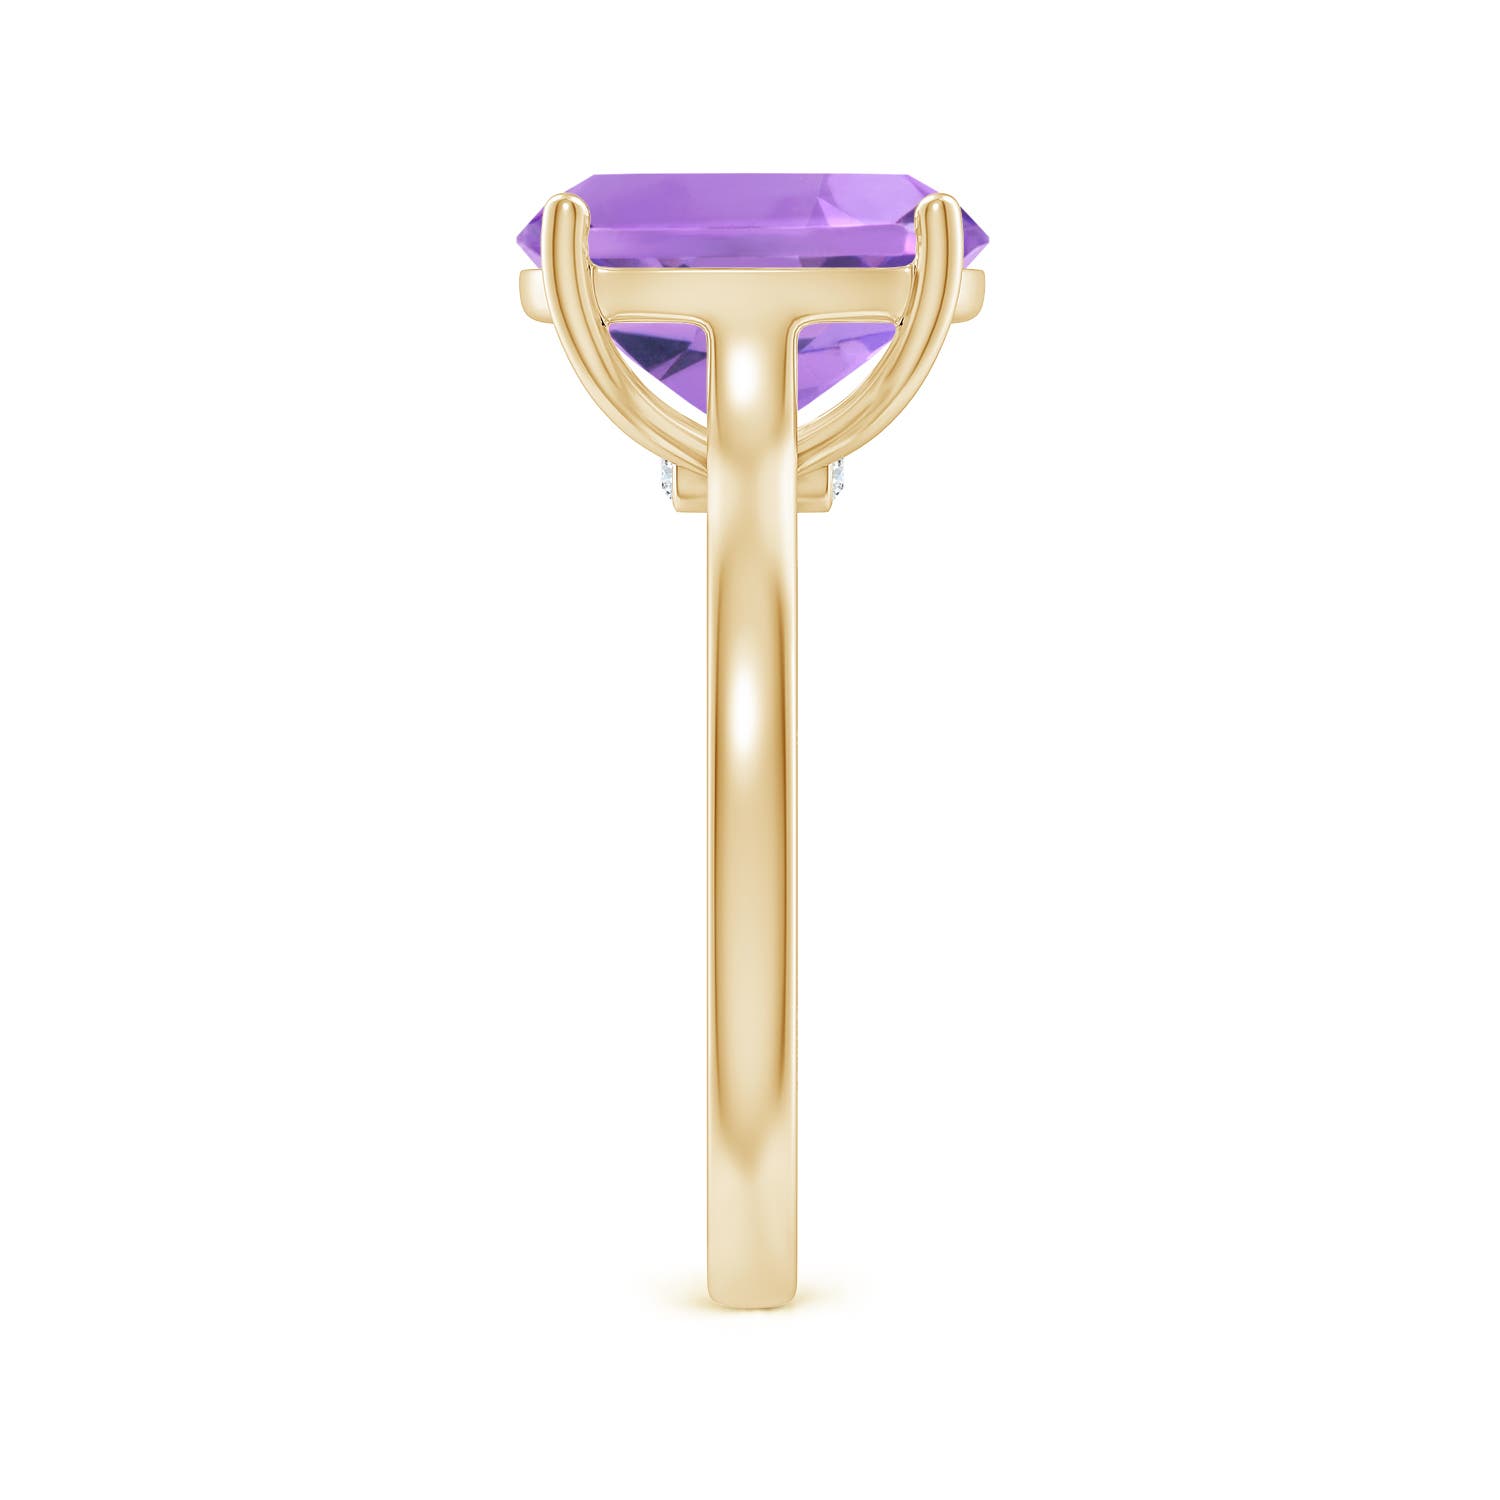 A - Amethyst / 3.53 CT / 14 KT Yellow Gold